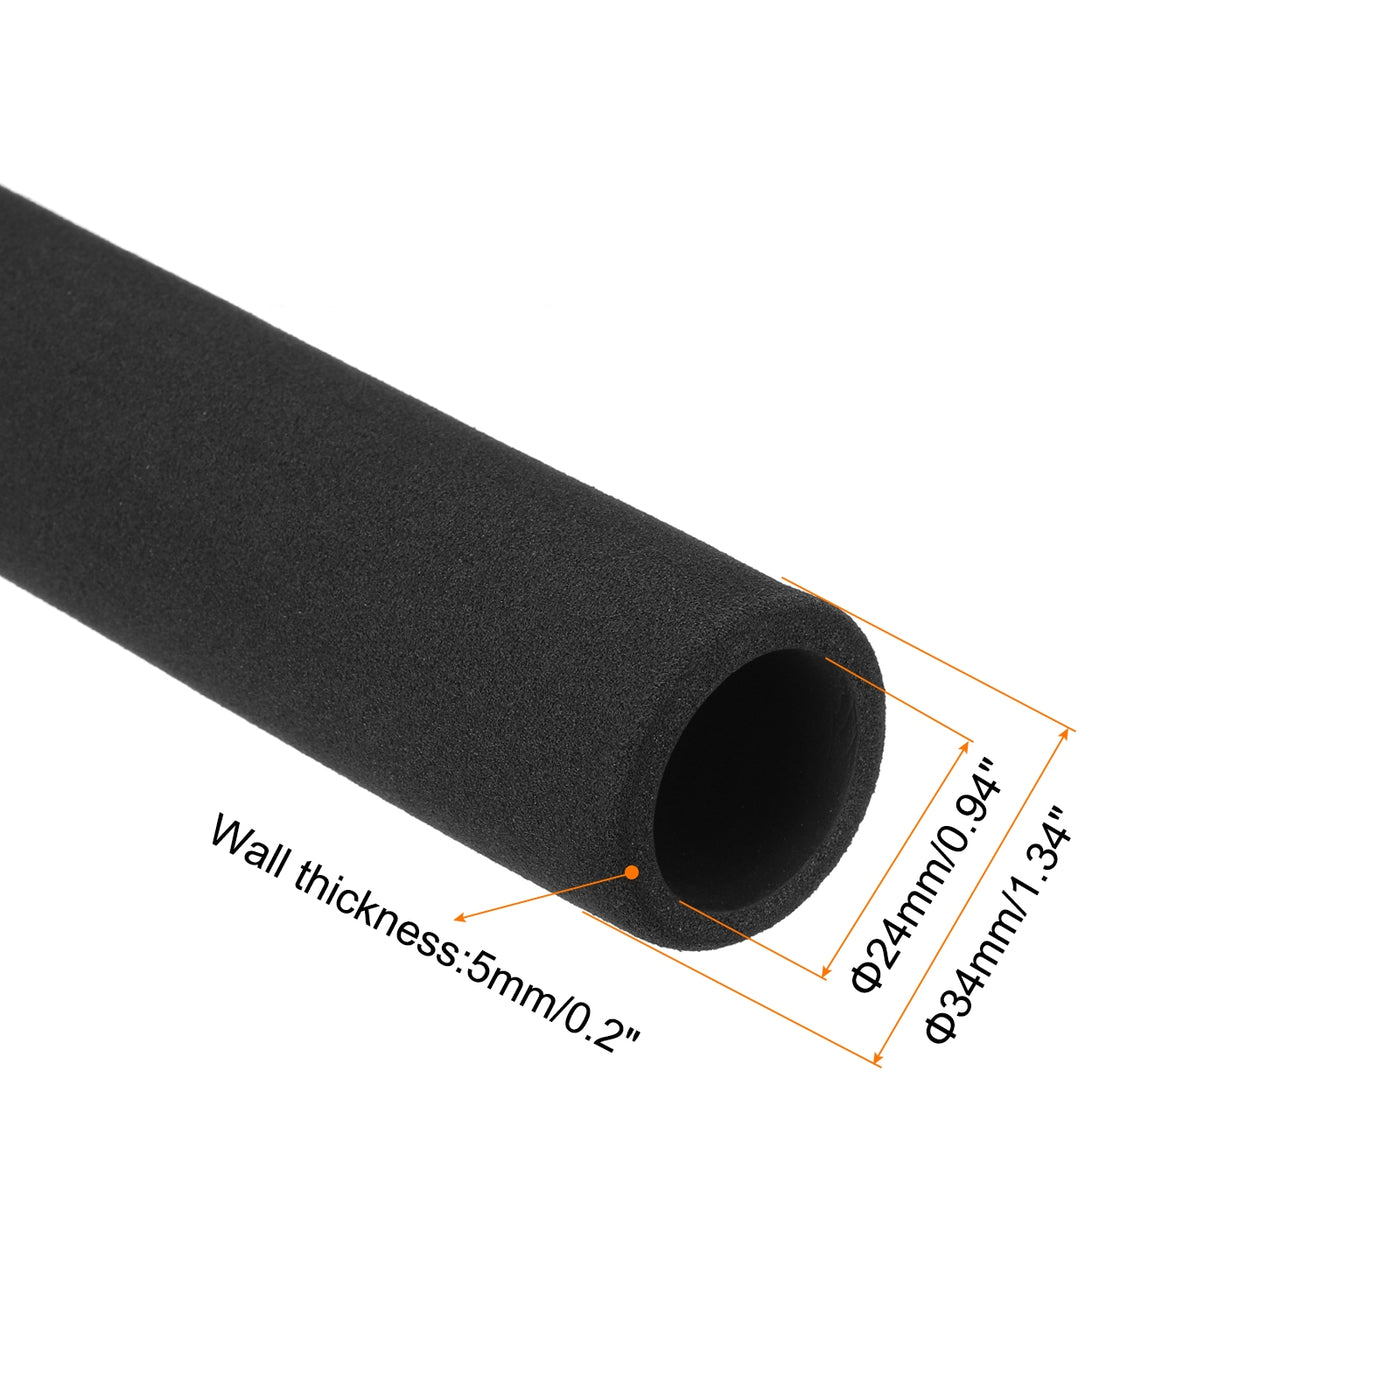 uxcell Uxcell Pipe Insulation Tube Foam Tubing for Handle Grip Support 24mm ID 34mm OD 485mm Heat Preservation Black 2pcs